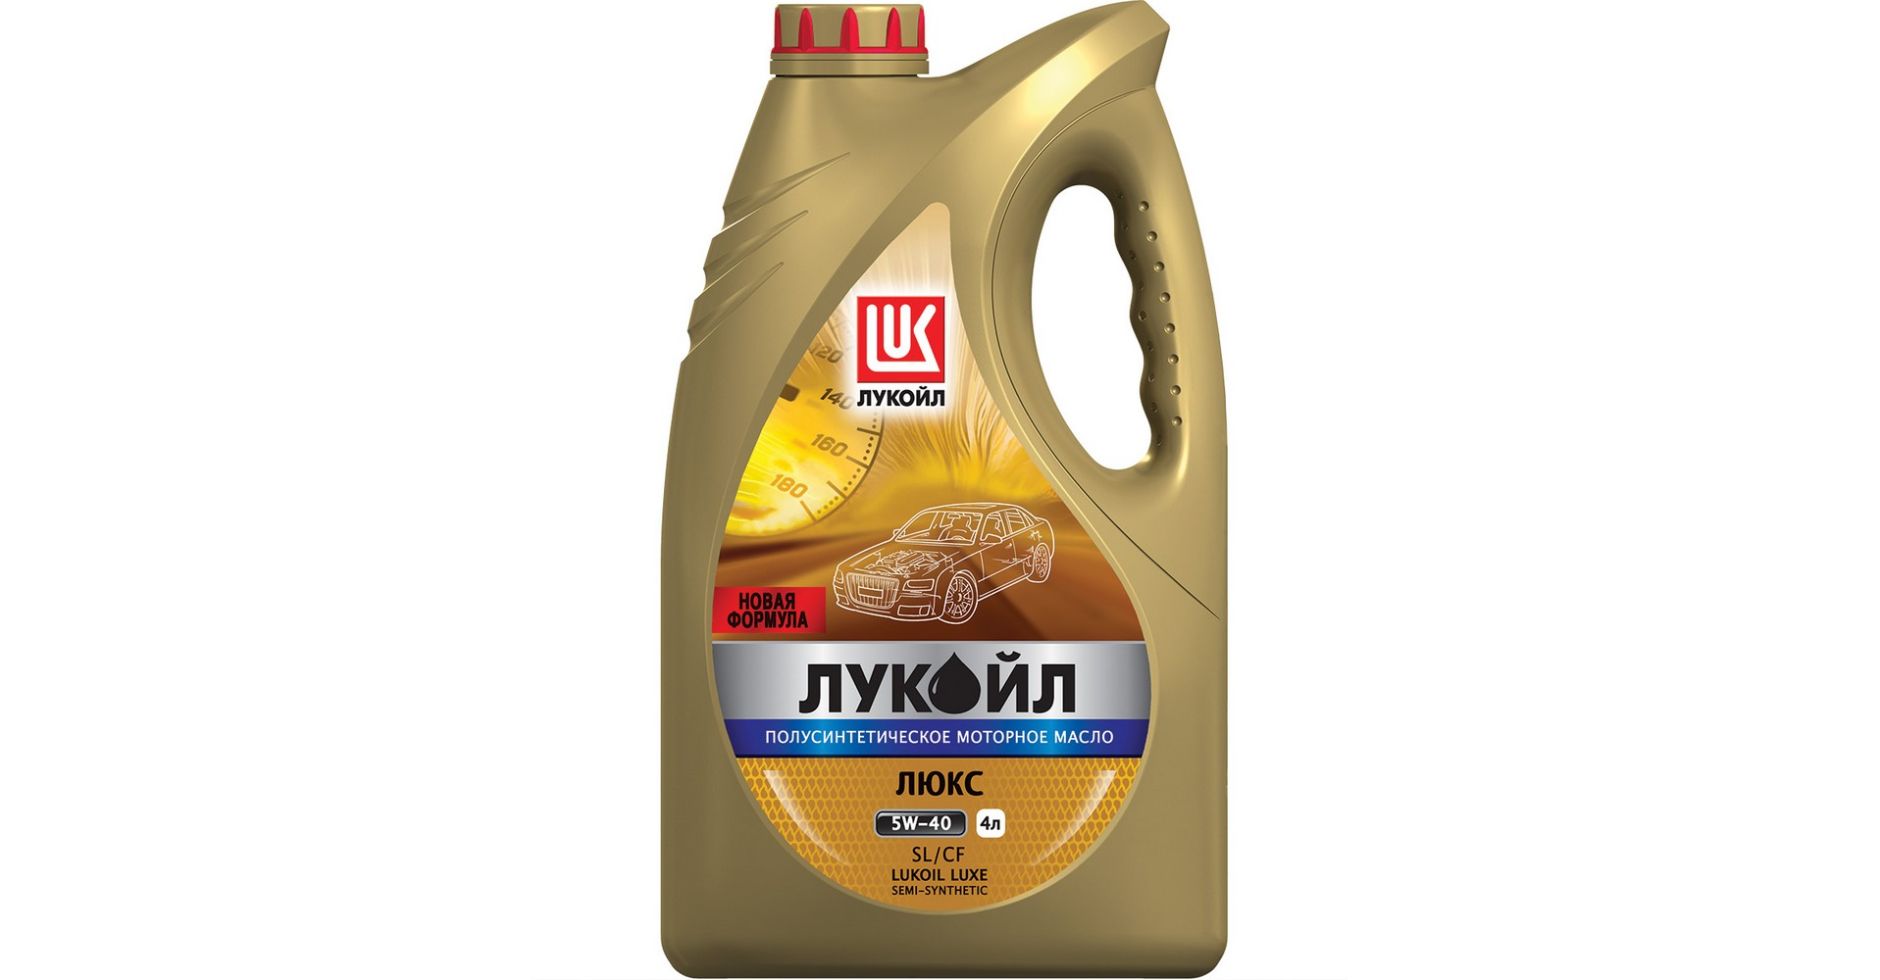 Lukoil Luxe 10w-40 5l. Лукойл Люкс 5w30 полусинтетика. Лукойл Люкс 10w 40 синтетика. Масло моторное 5w40 Лукойл Люкс.